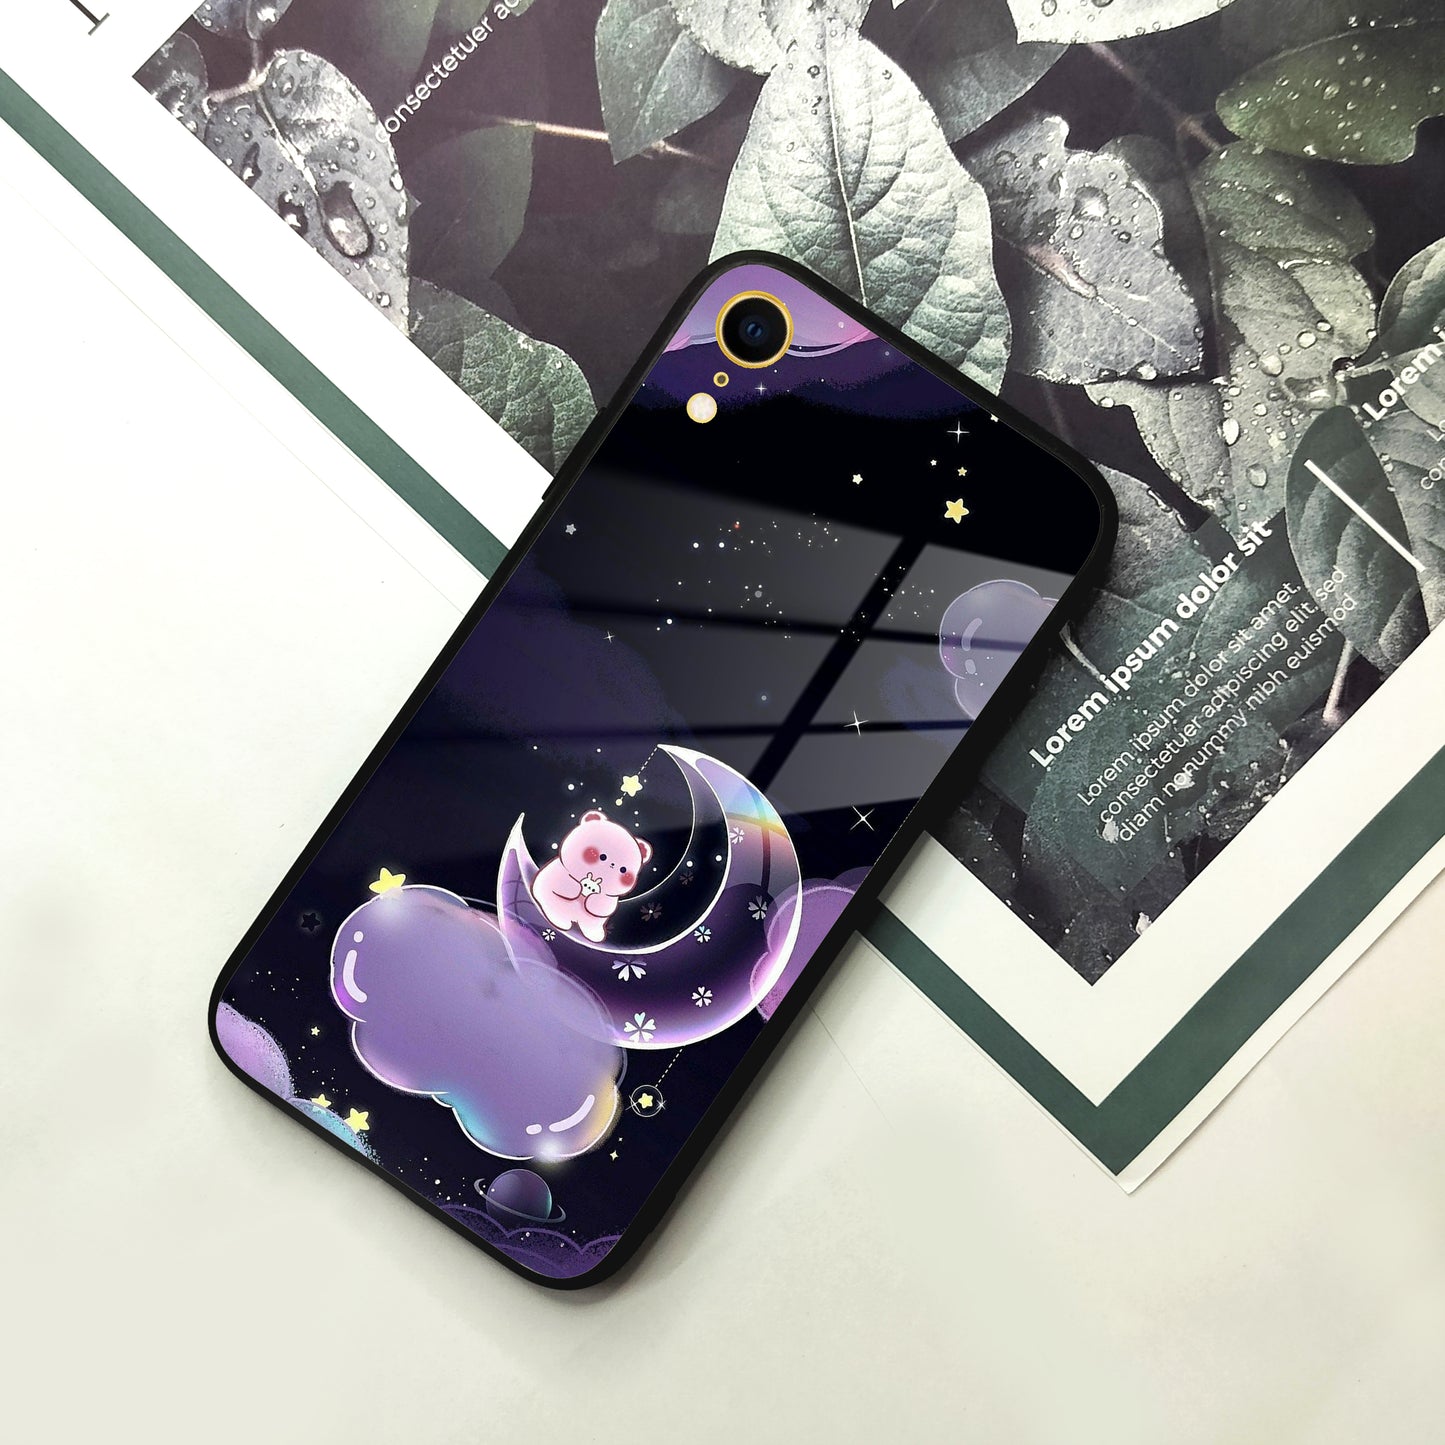 Sky Panda Design Glass Phone Case Cover For iPhone